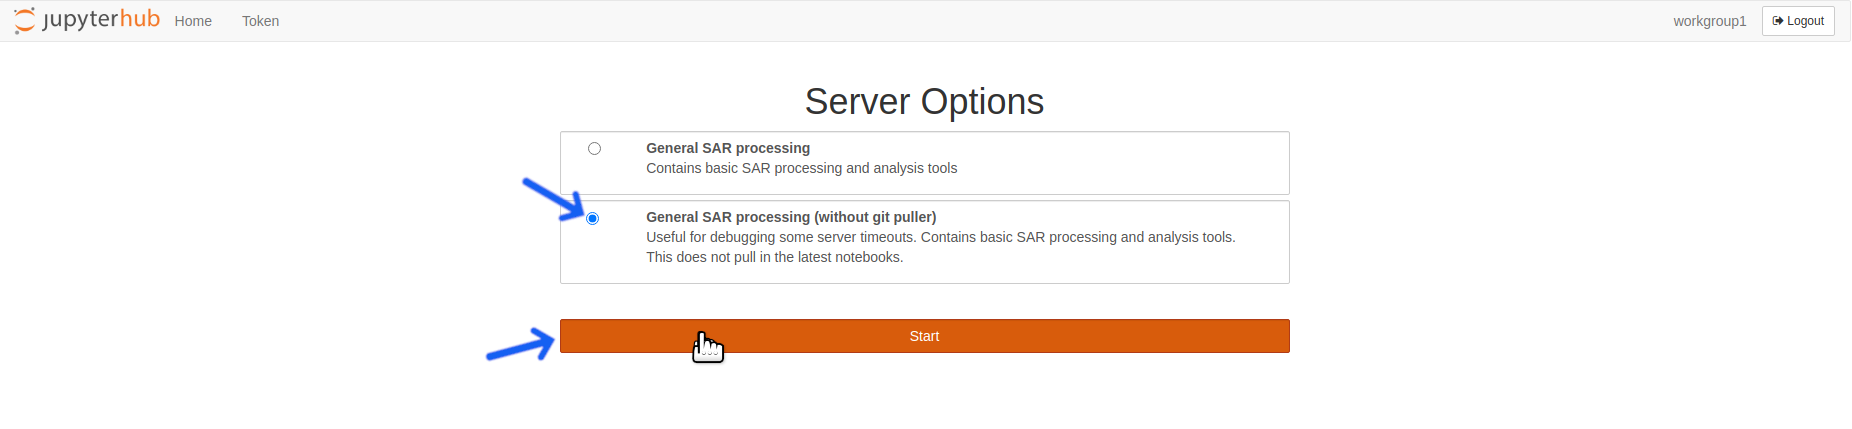 The "General SAR processing (without git puller)" server option is below the "General SAR processing" option.